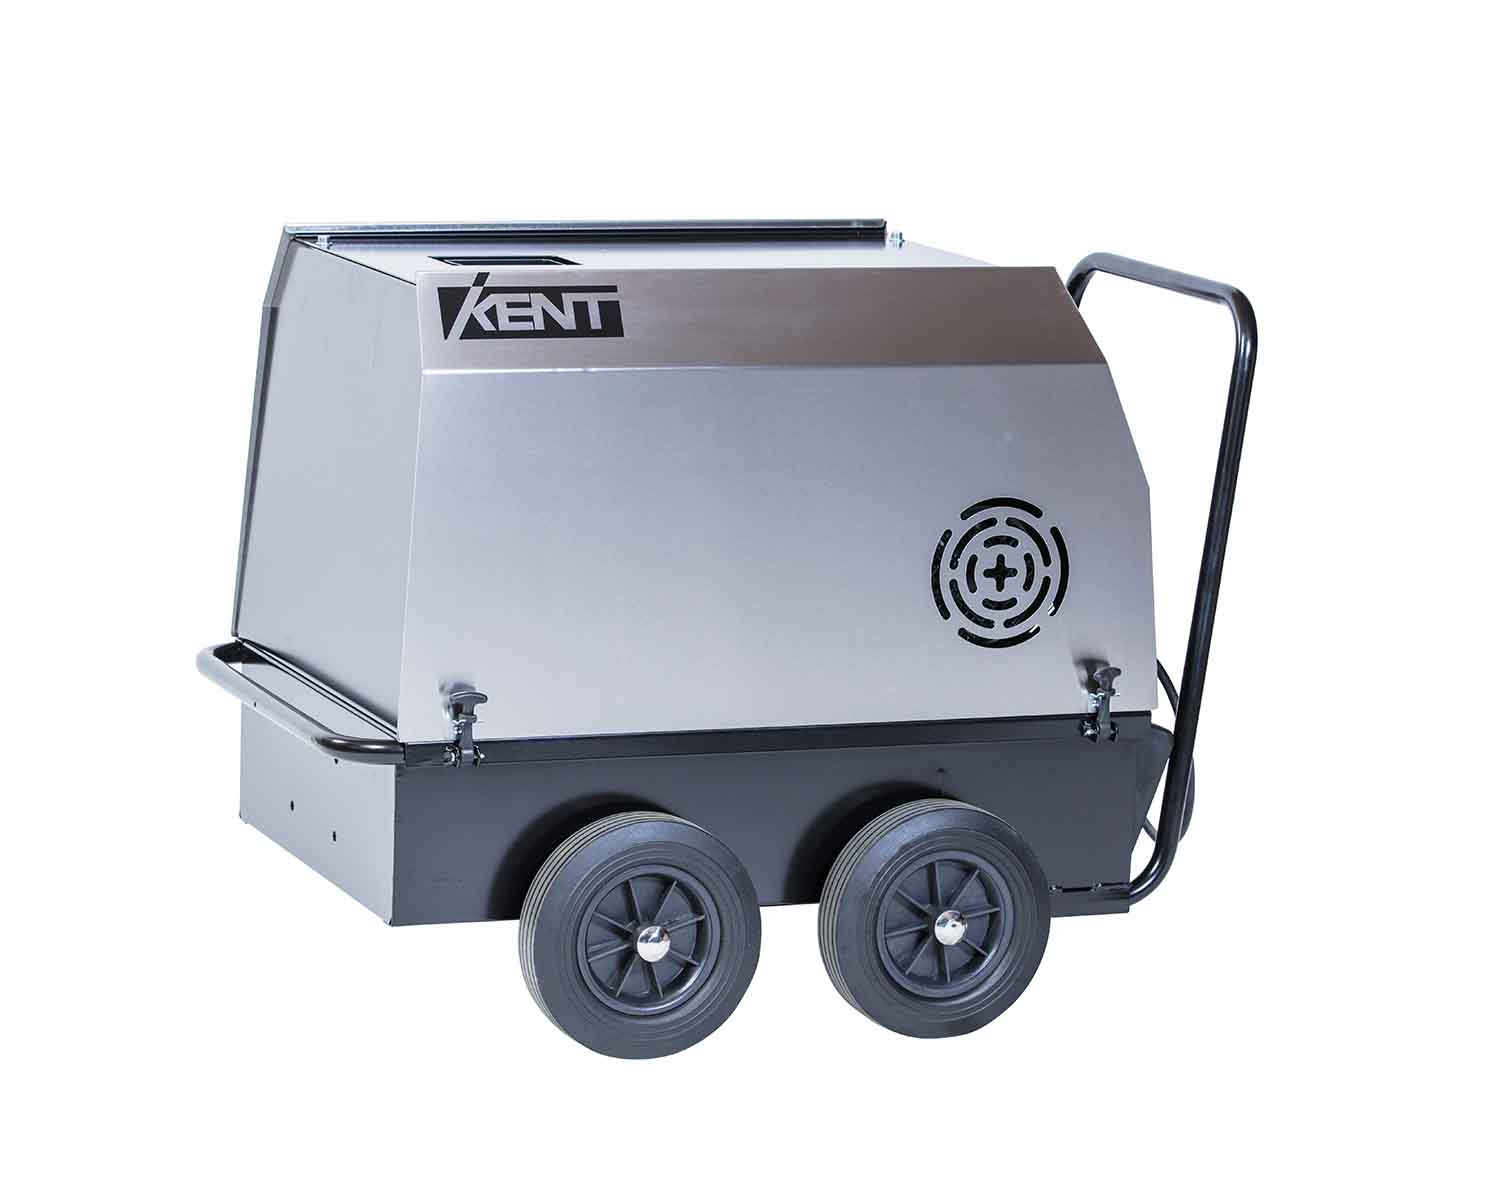 Hot Water Cleaner Professional 4-wheeled pressure washer with hot water for professional use